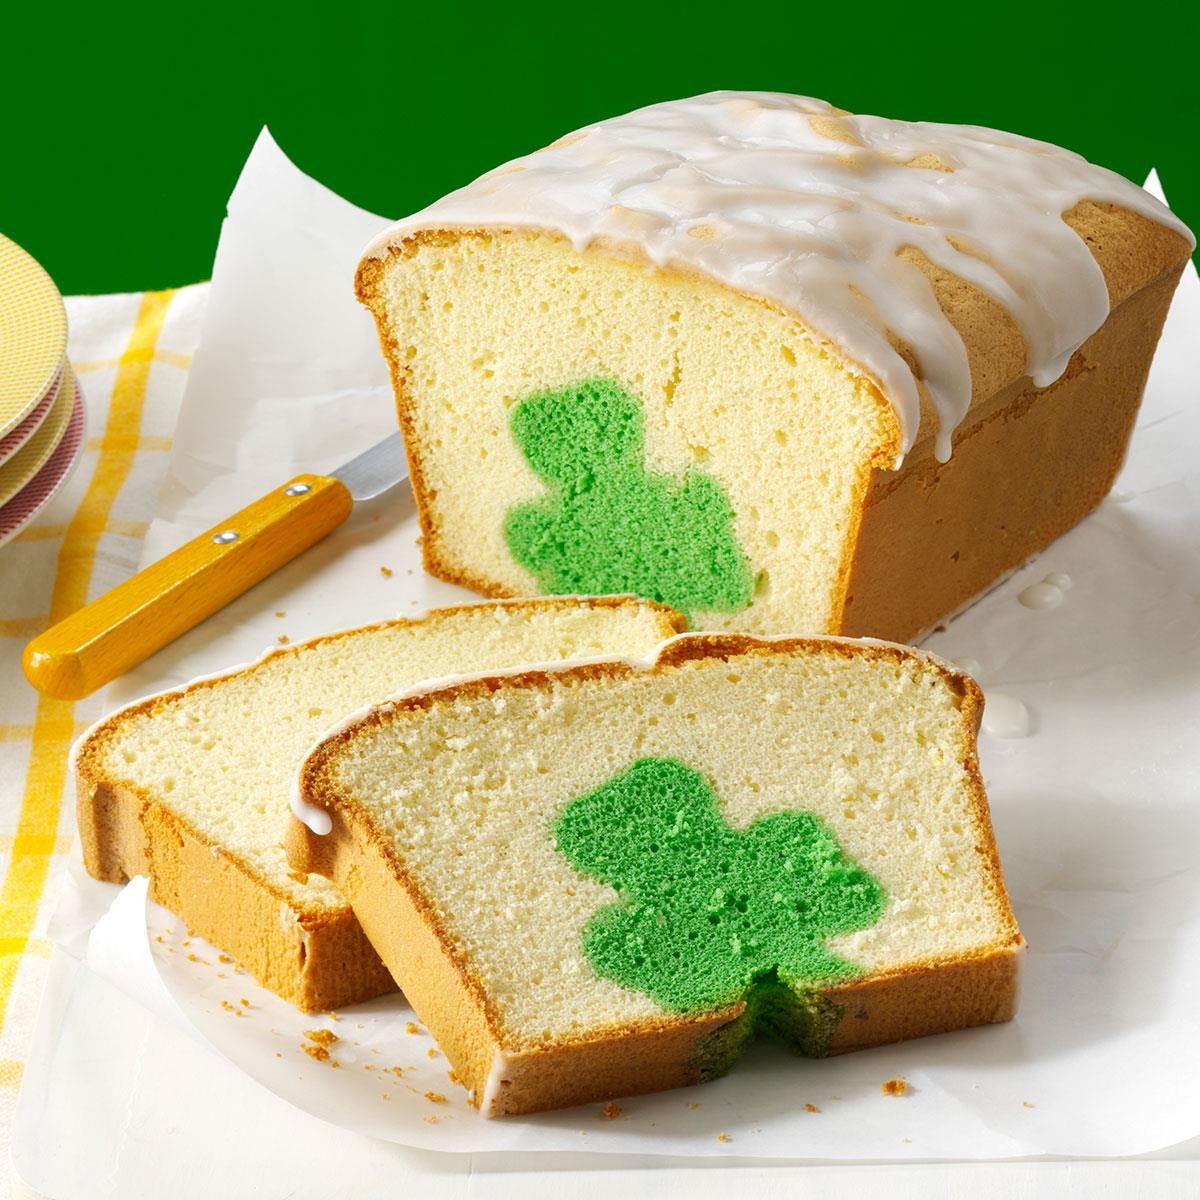 <p>My son Gabriel loves surprises inside cakes, like seeing a shamrock when this cake is sliced. Everyone wants to know how it’s done. — Angela Lively, Spring, Texas </p> <div class="listicle-page__buttons"> <div class="listicle-page__cta-button"><a href='https://www.tasteofhome.com/recipes/shamrock-cutout-pound-cake/'>Go to Recipe</a></div> </div>